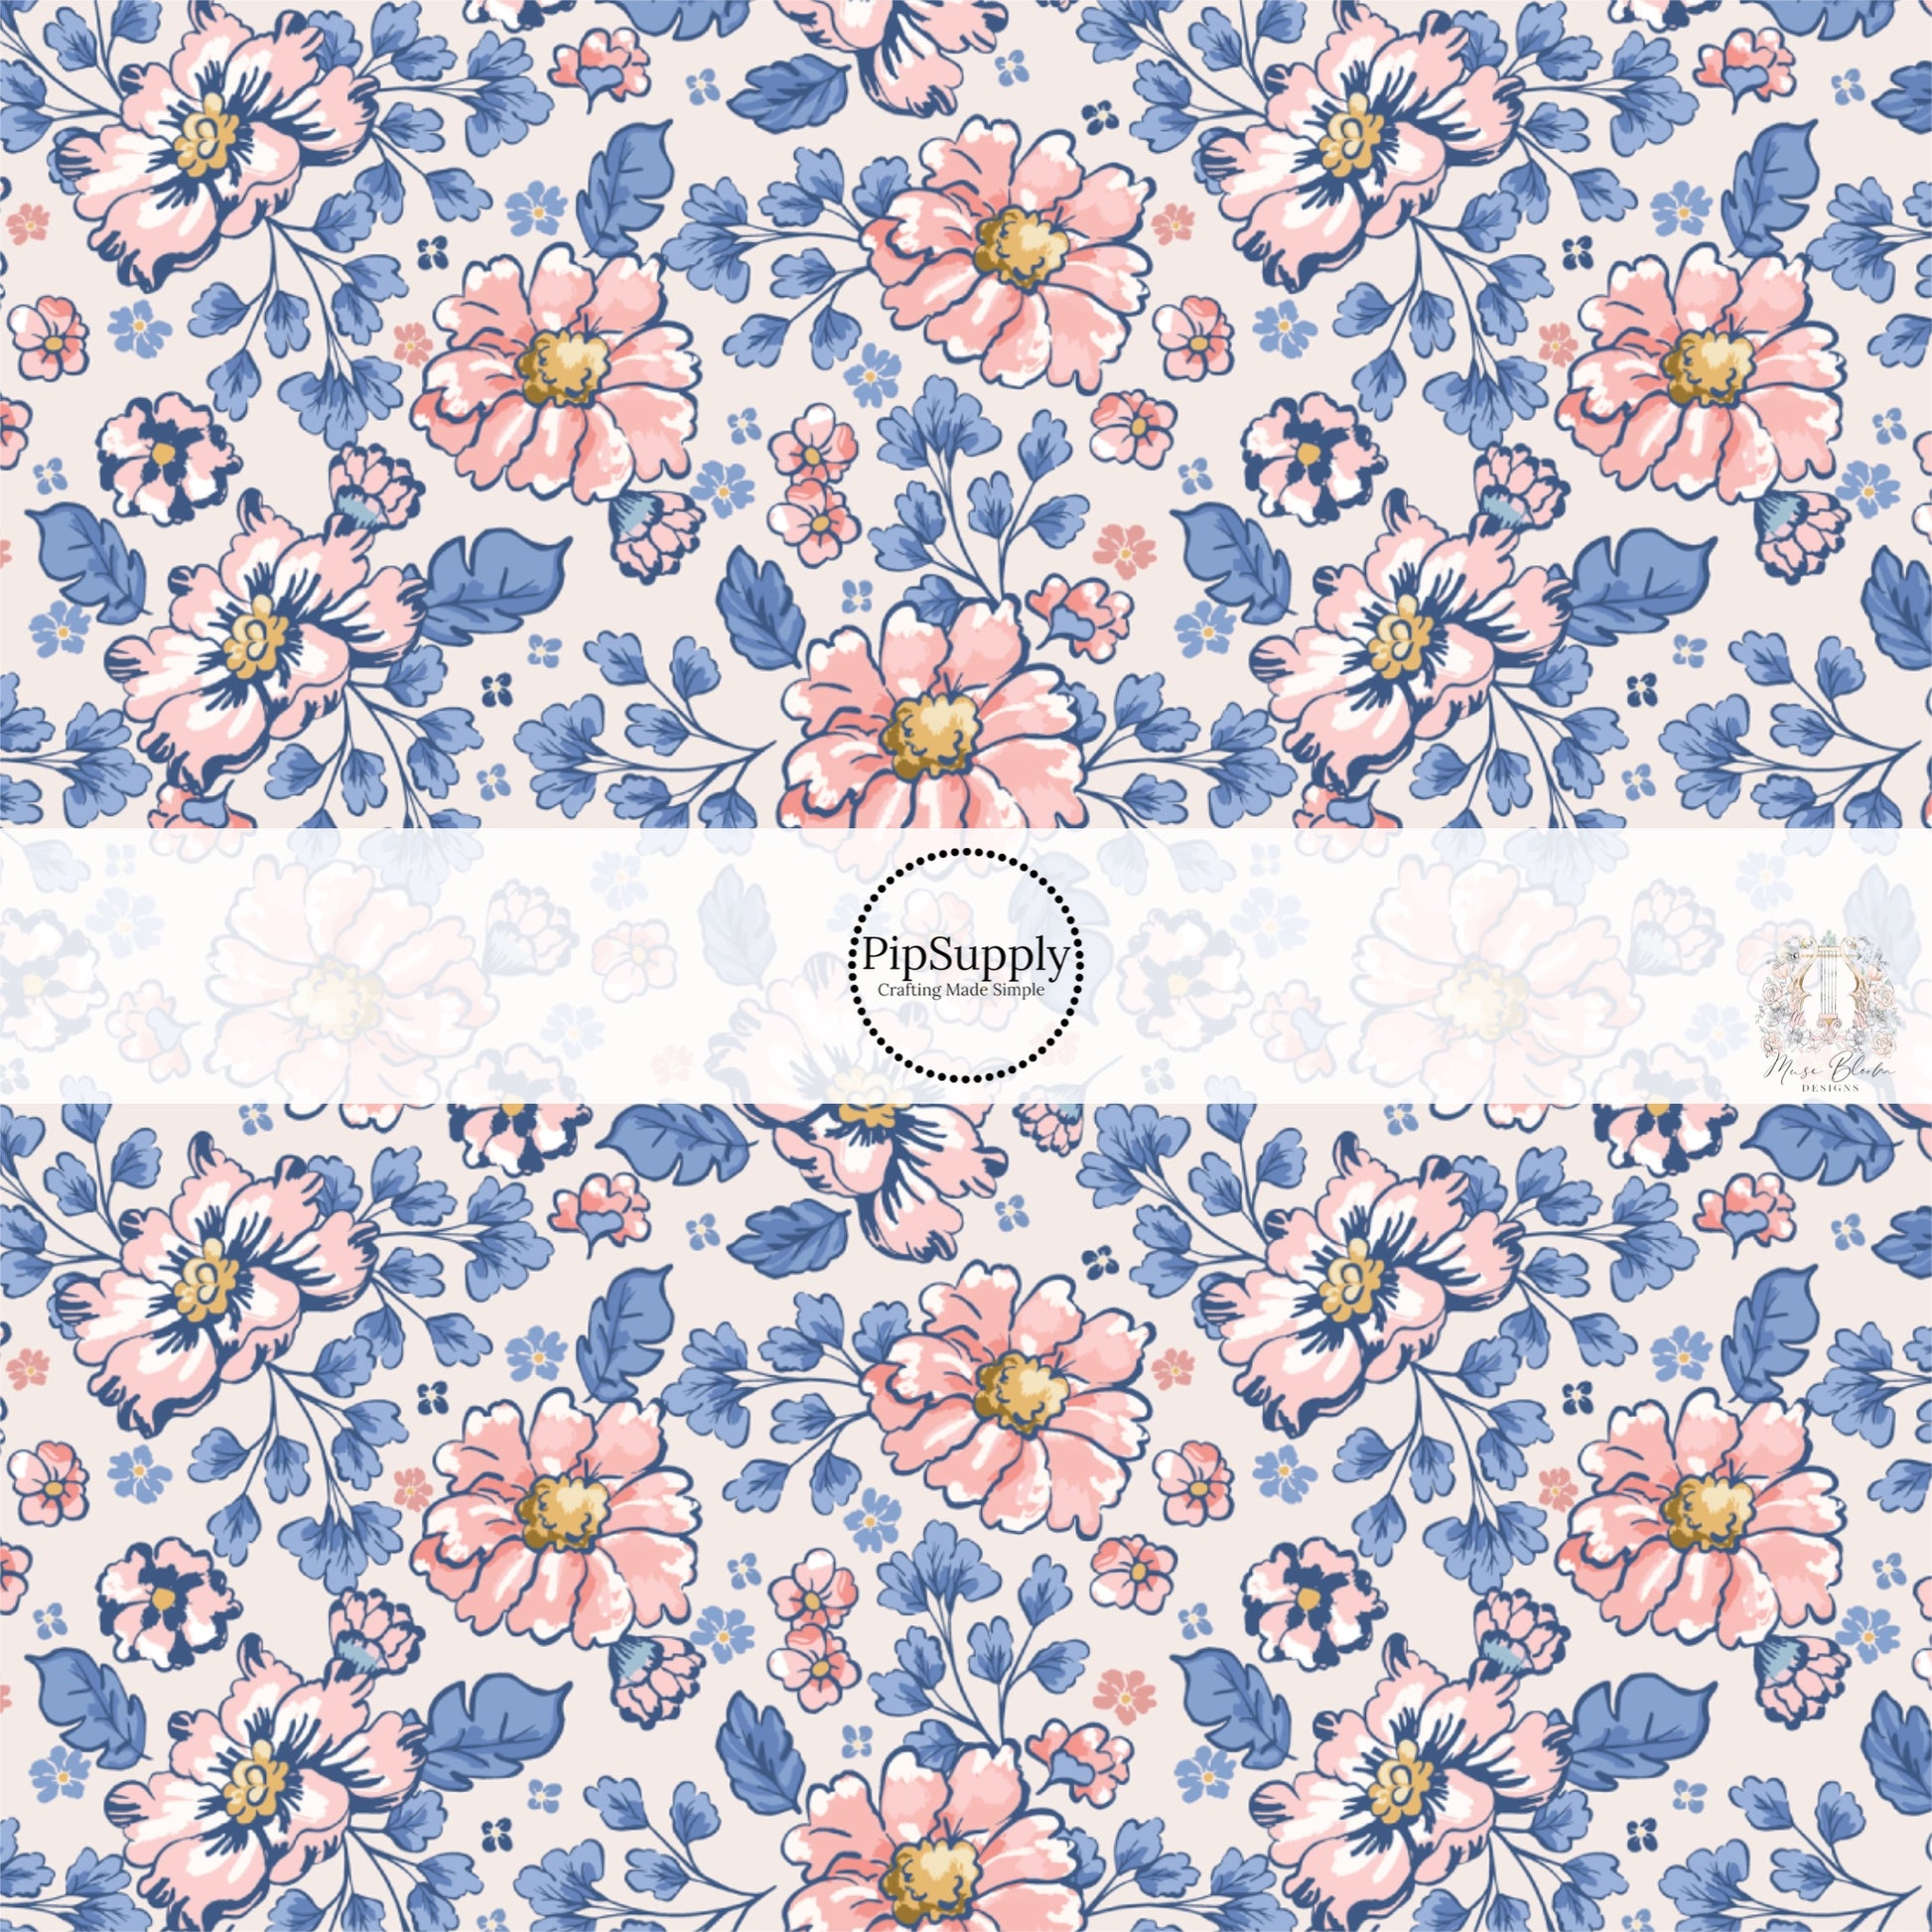 These floral themed cream fabric by the yard features peach, light pink, and blue flowers on cream. This fun summer floral themed fabric can be used for all your sewing and crafting needs! 